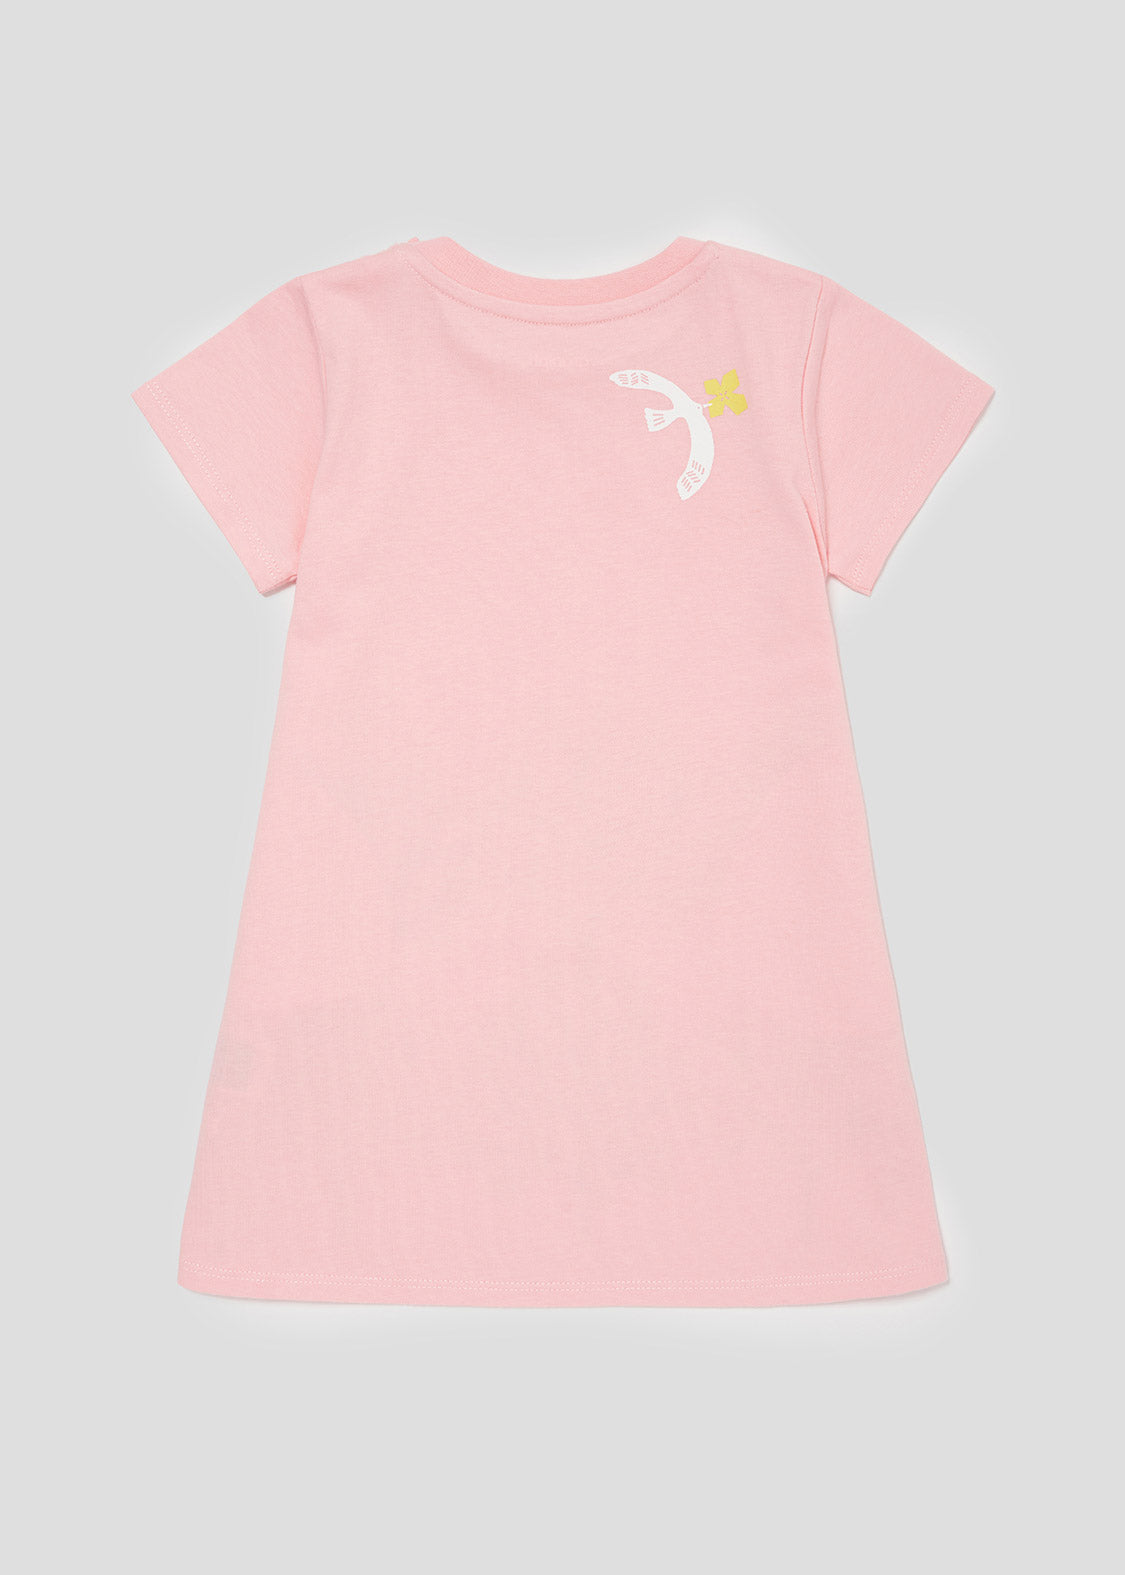 A Line Short Sleeve One-Piece  (Birds Taking Flowers) - Baby